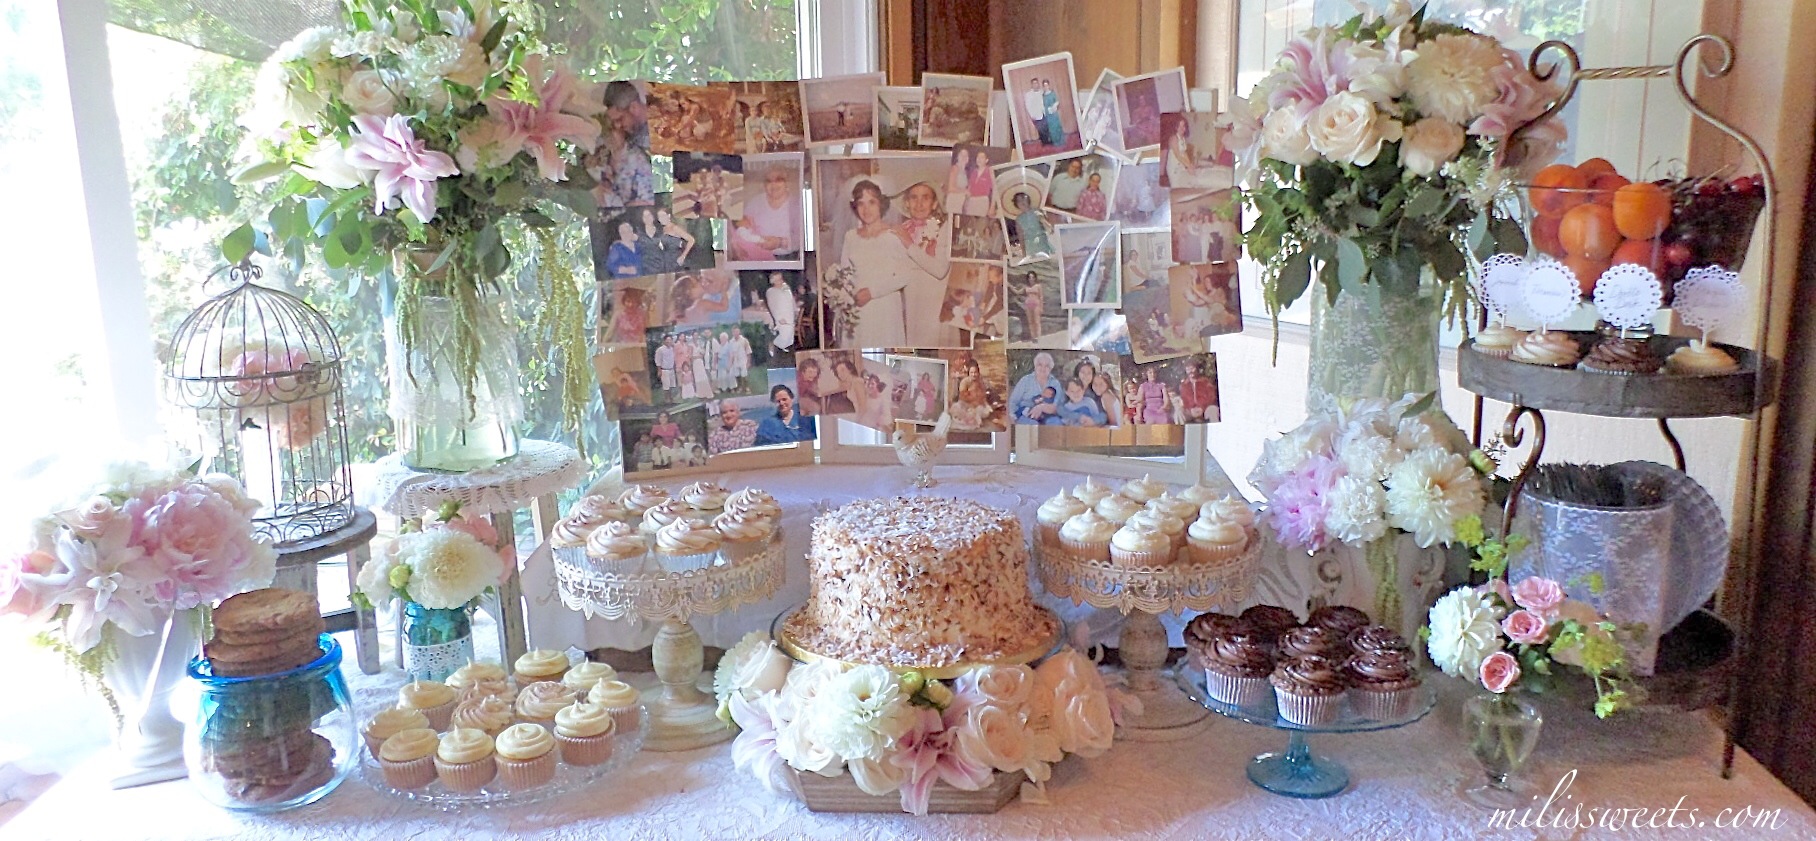 for my beautiful mother, 70th birthday, floral dessert table, via milissweets.com